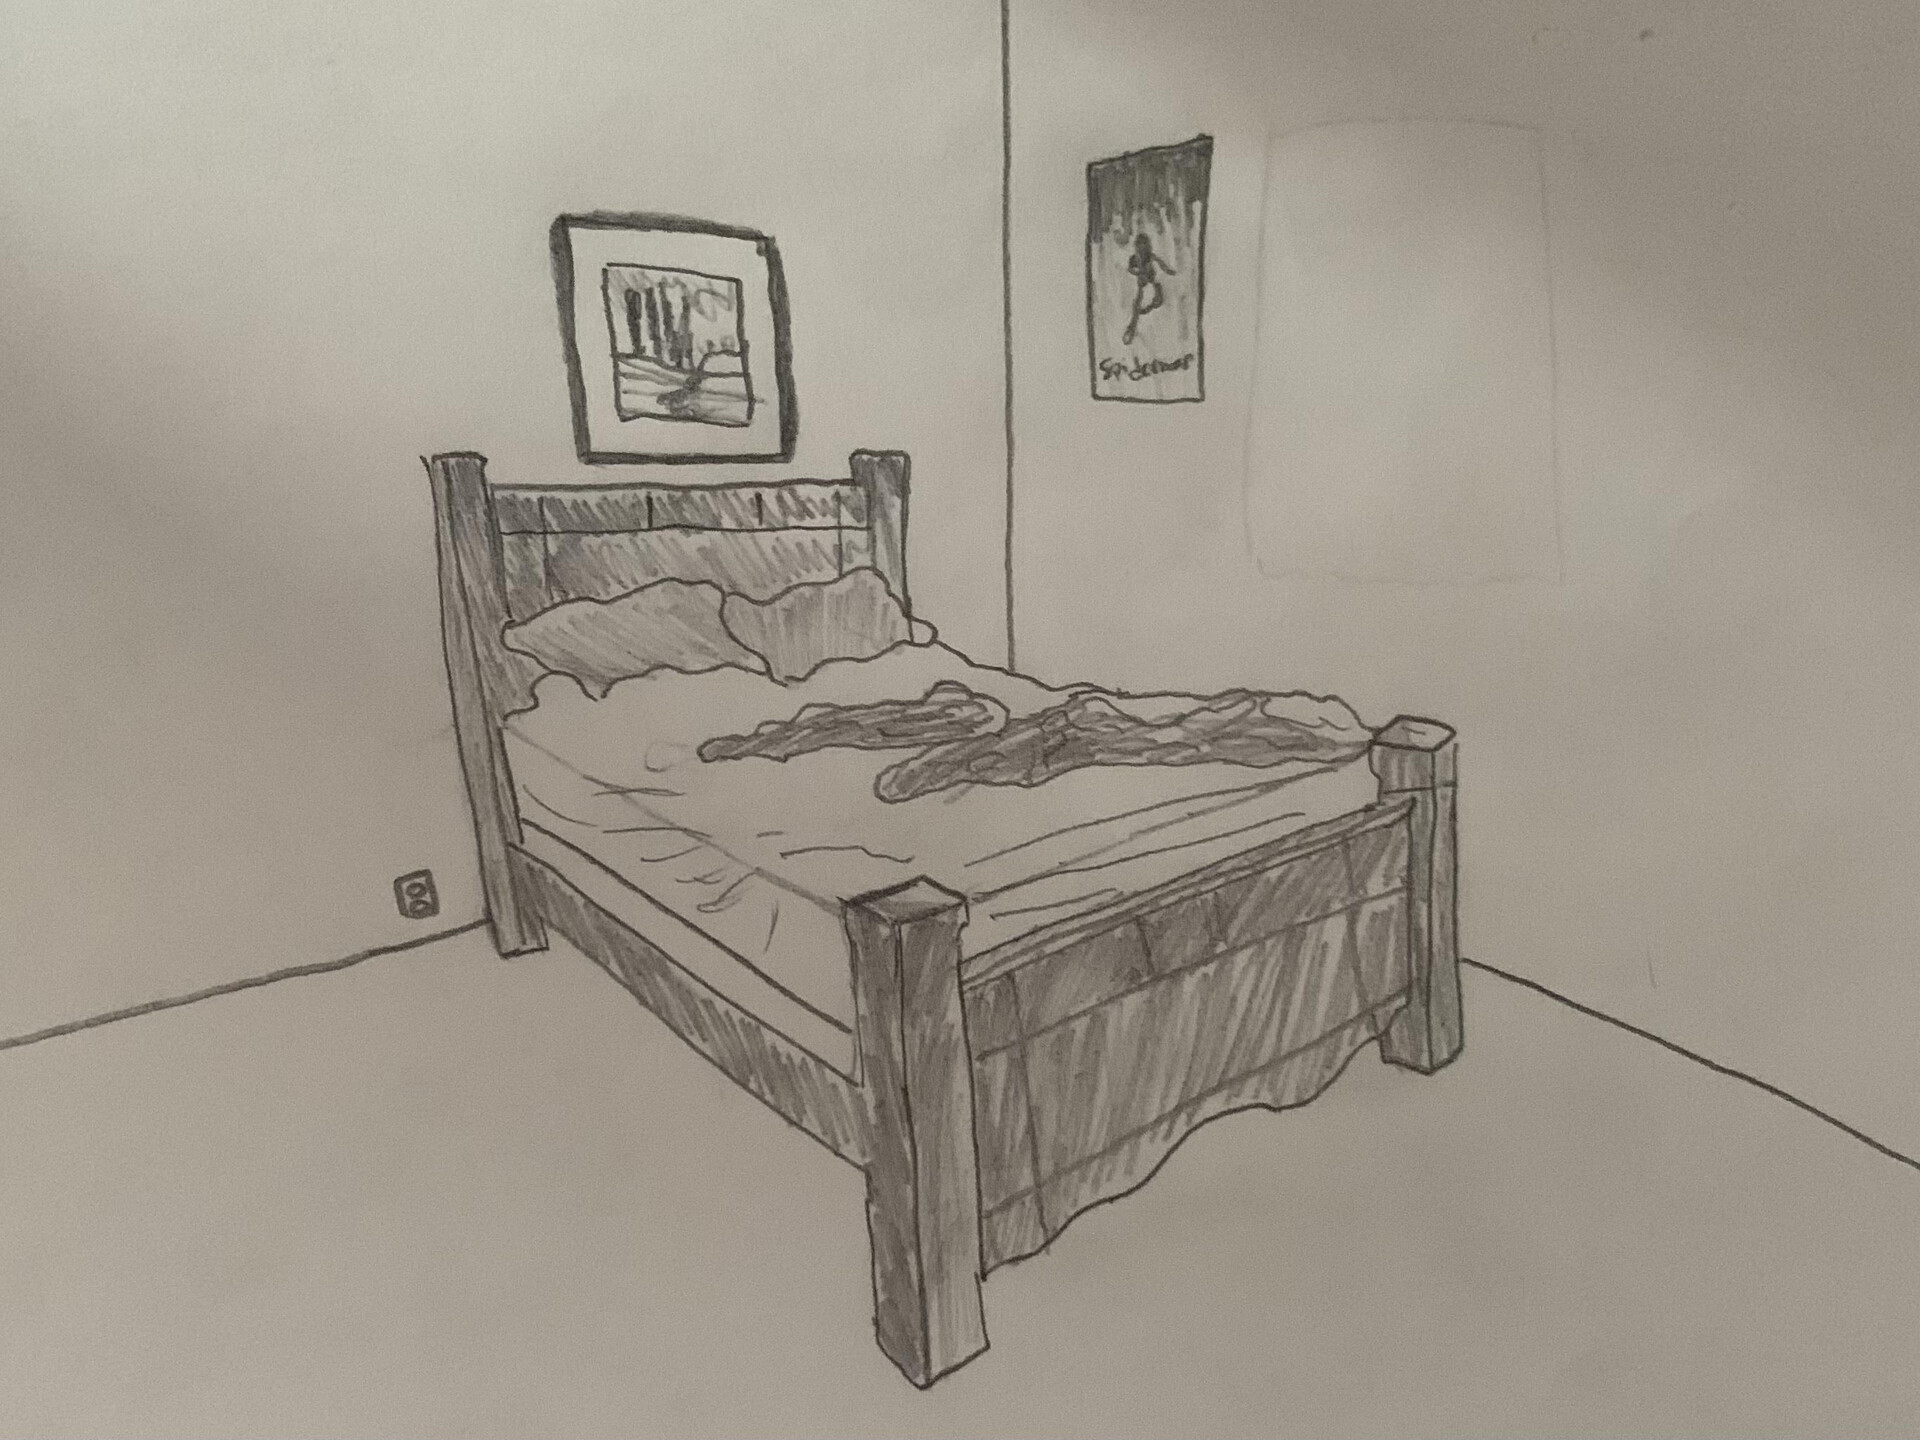 25 Easy Bed Drawing Ideas - How to Draw a Bed